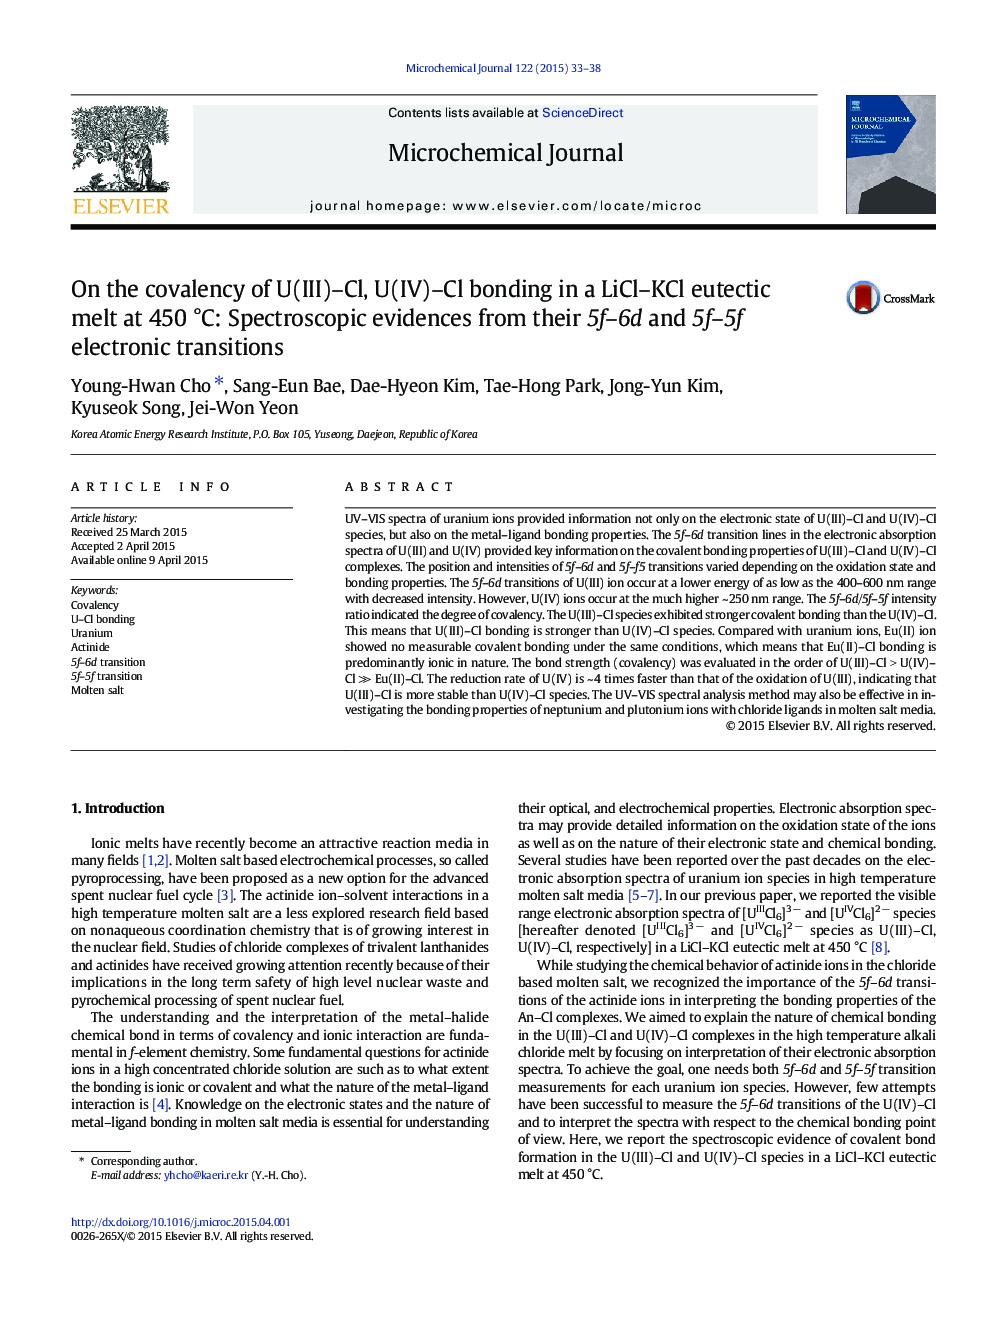 On the covalency of U(III)–Cl, U(IV)–Cl bonding in a LiCl–KCl eutectic melt at 450 °C: Spectroscopic evidences from their 5f–6d and 5f–5f electronic transitions